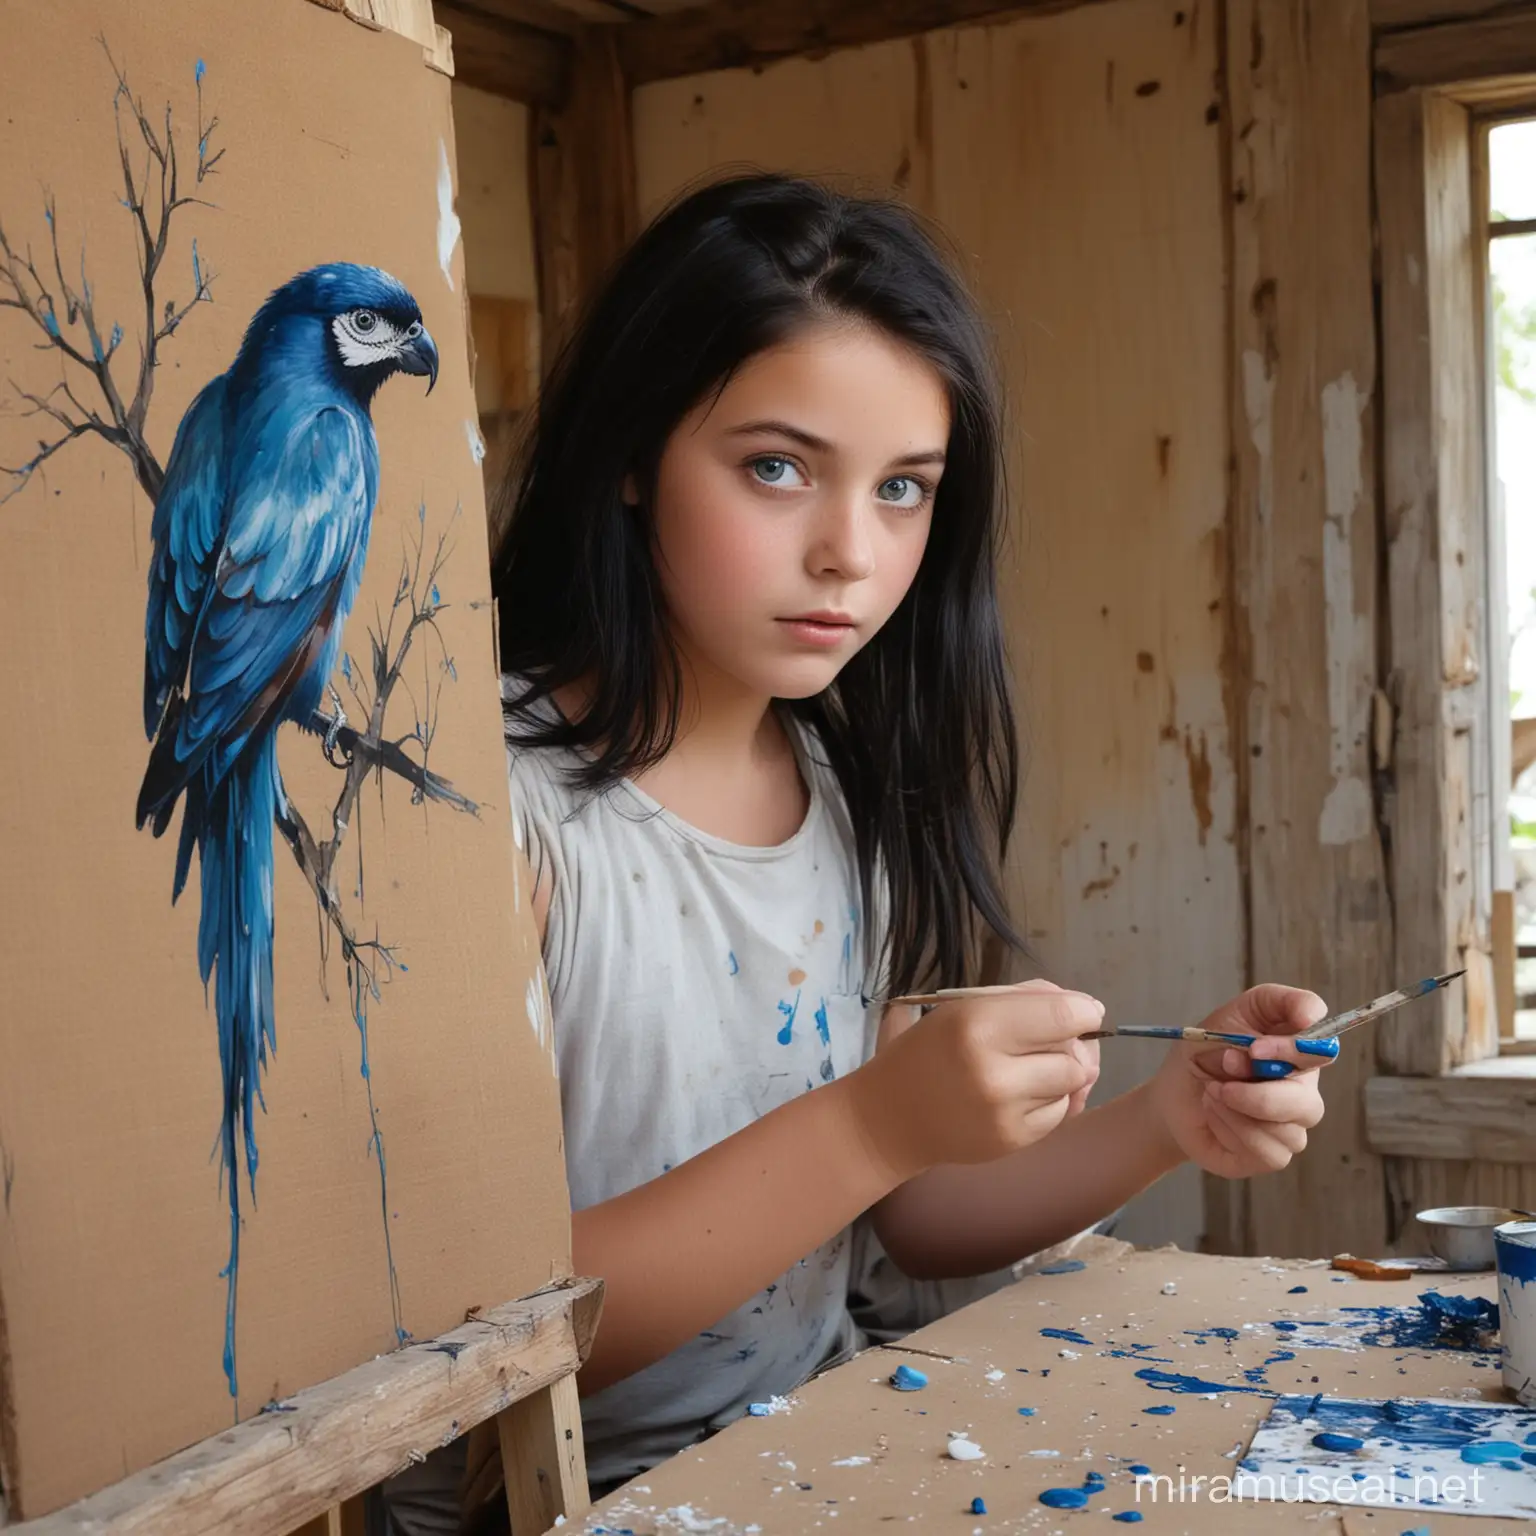 Girl Painting a Bird in a Rustic Shack with Magical Transformation